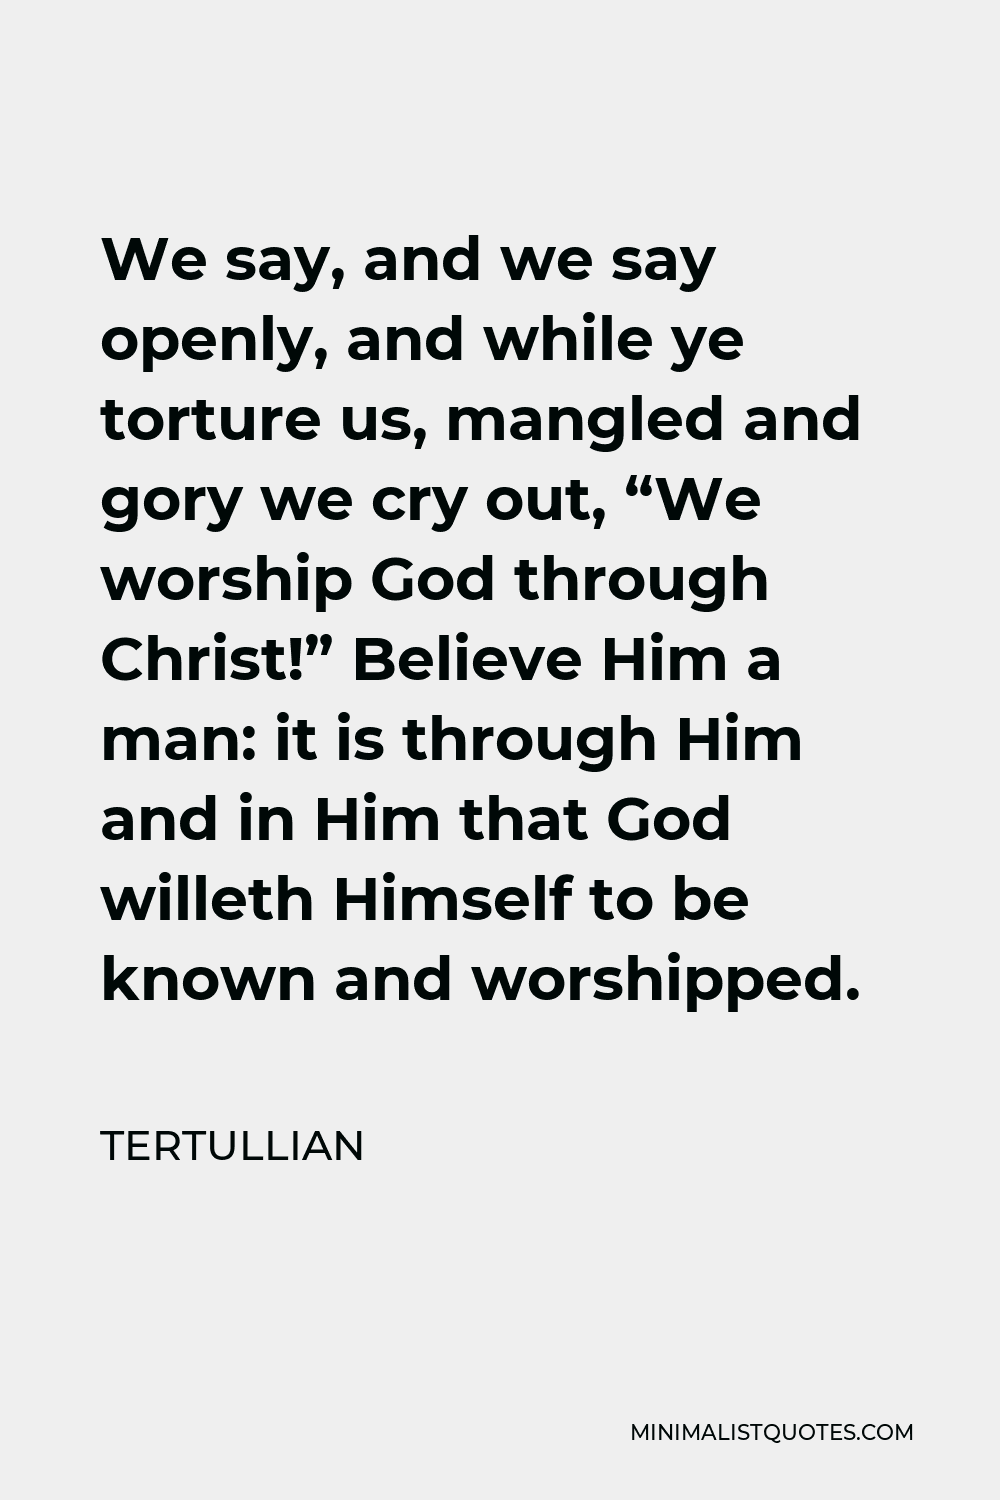 Tertullian Quote - We say, and we say openly, and while ye torture us, mangled and gory we cry out, “We worship God through Christ!” Believe Him a man: it is through Him and in Him that God willeth Himself to be known and worshipped.